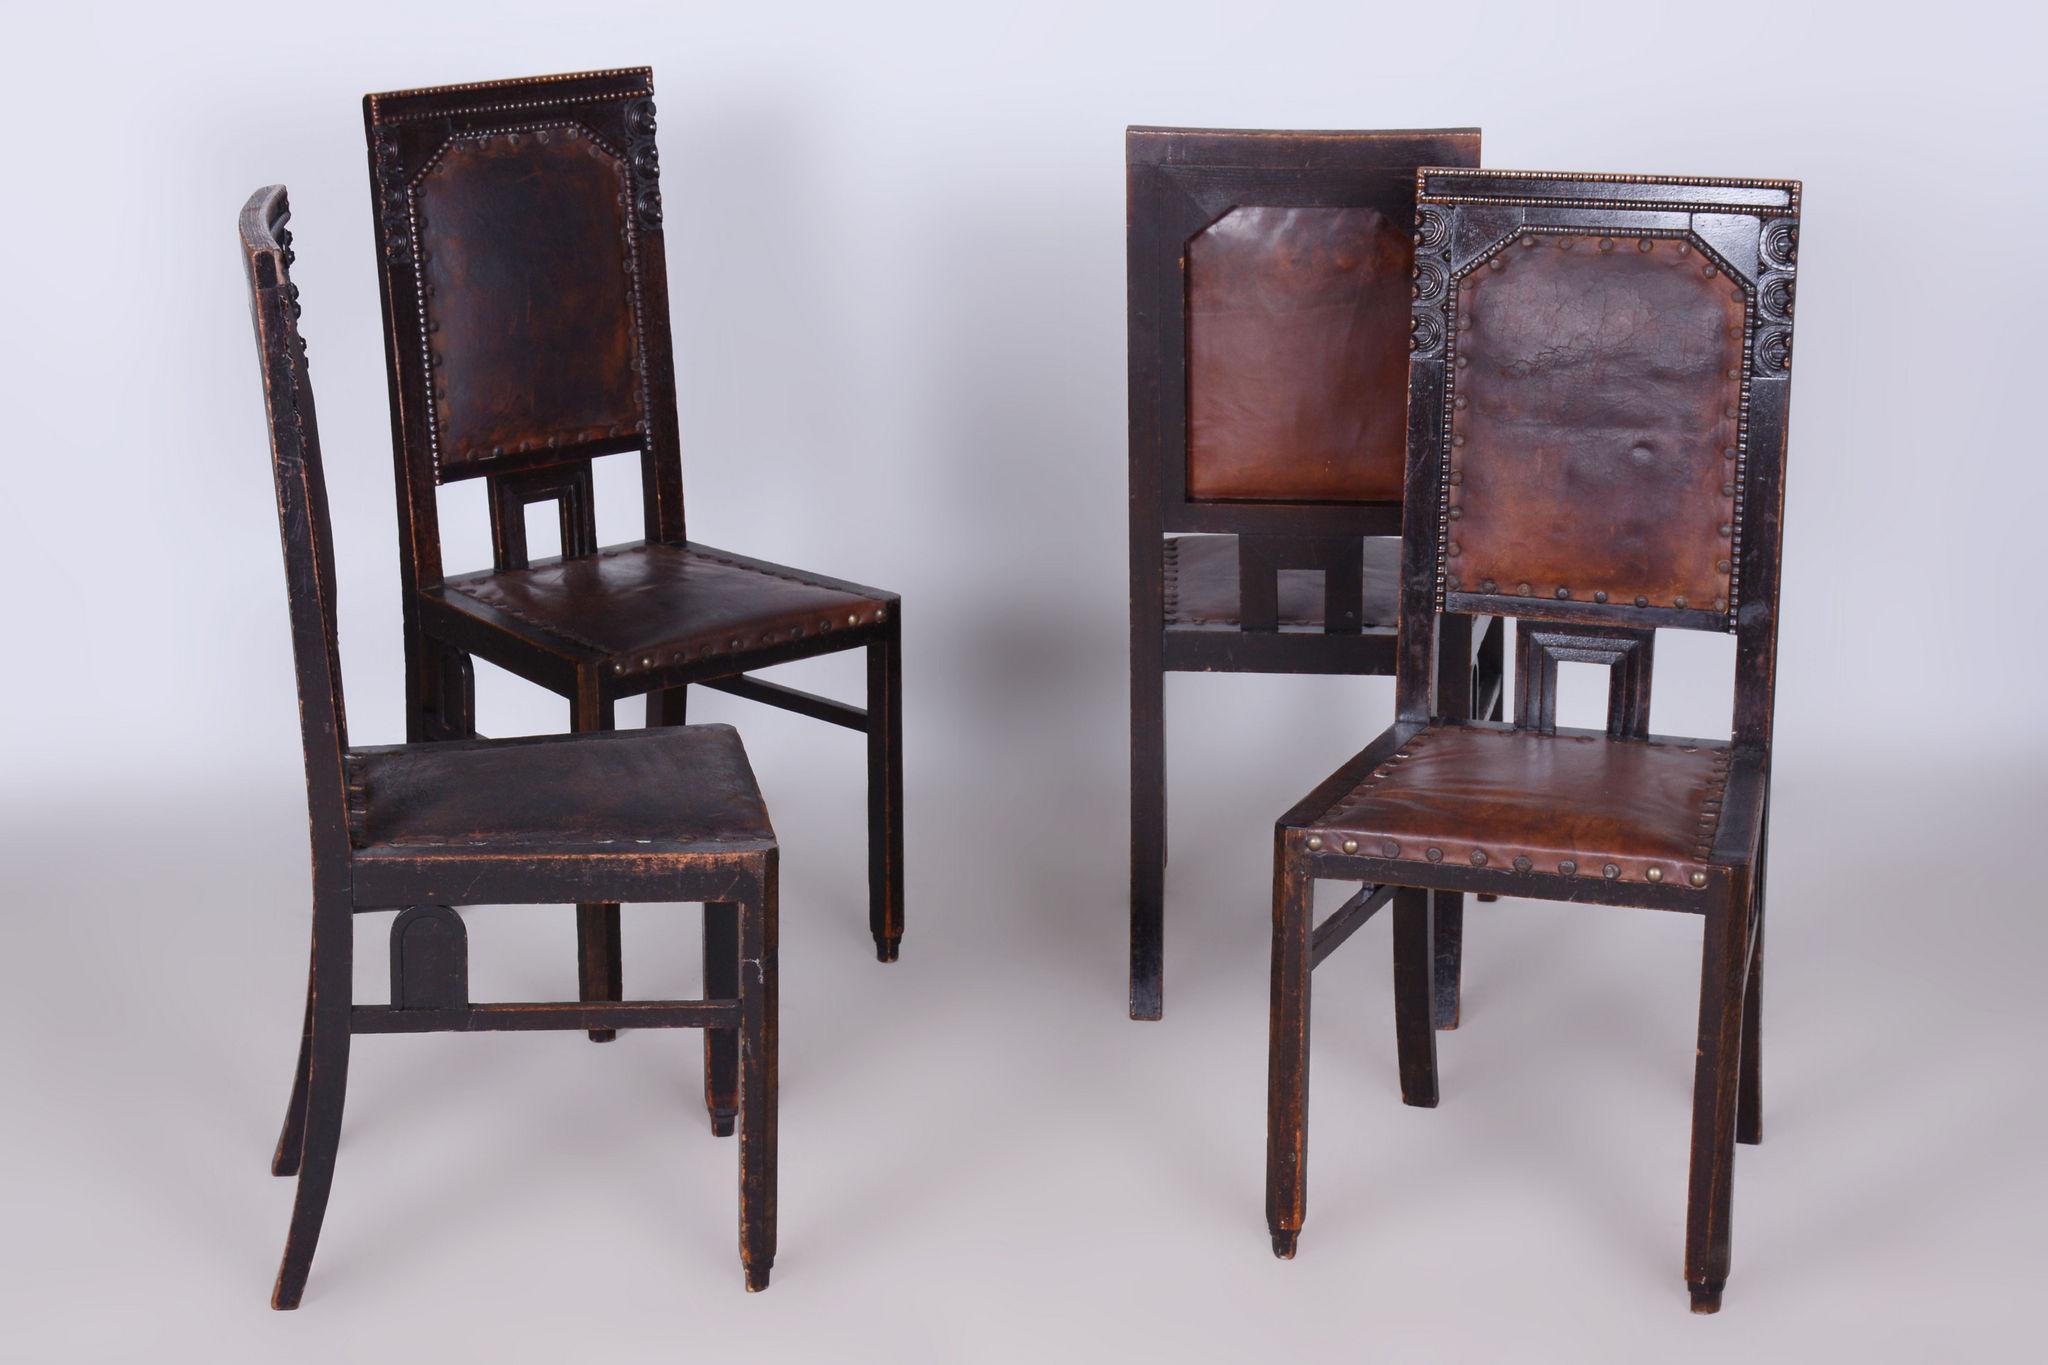 Set of Four Cubist Chairs, by Josef Gočár, Solid Oak, Red Leather, Czech, 1910s In Good Condition For Sale In Horomerice, CZ